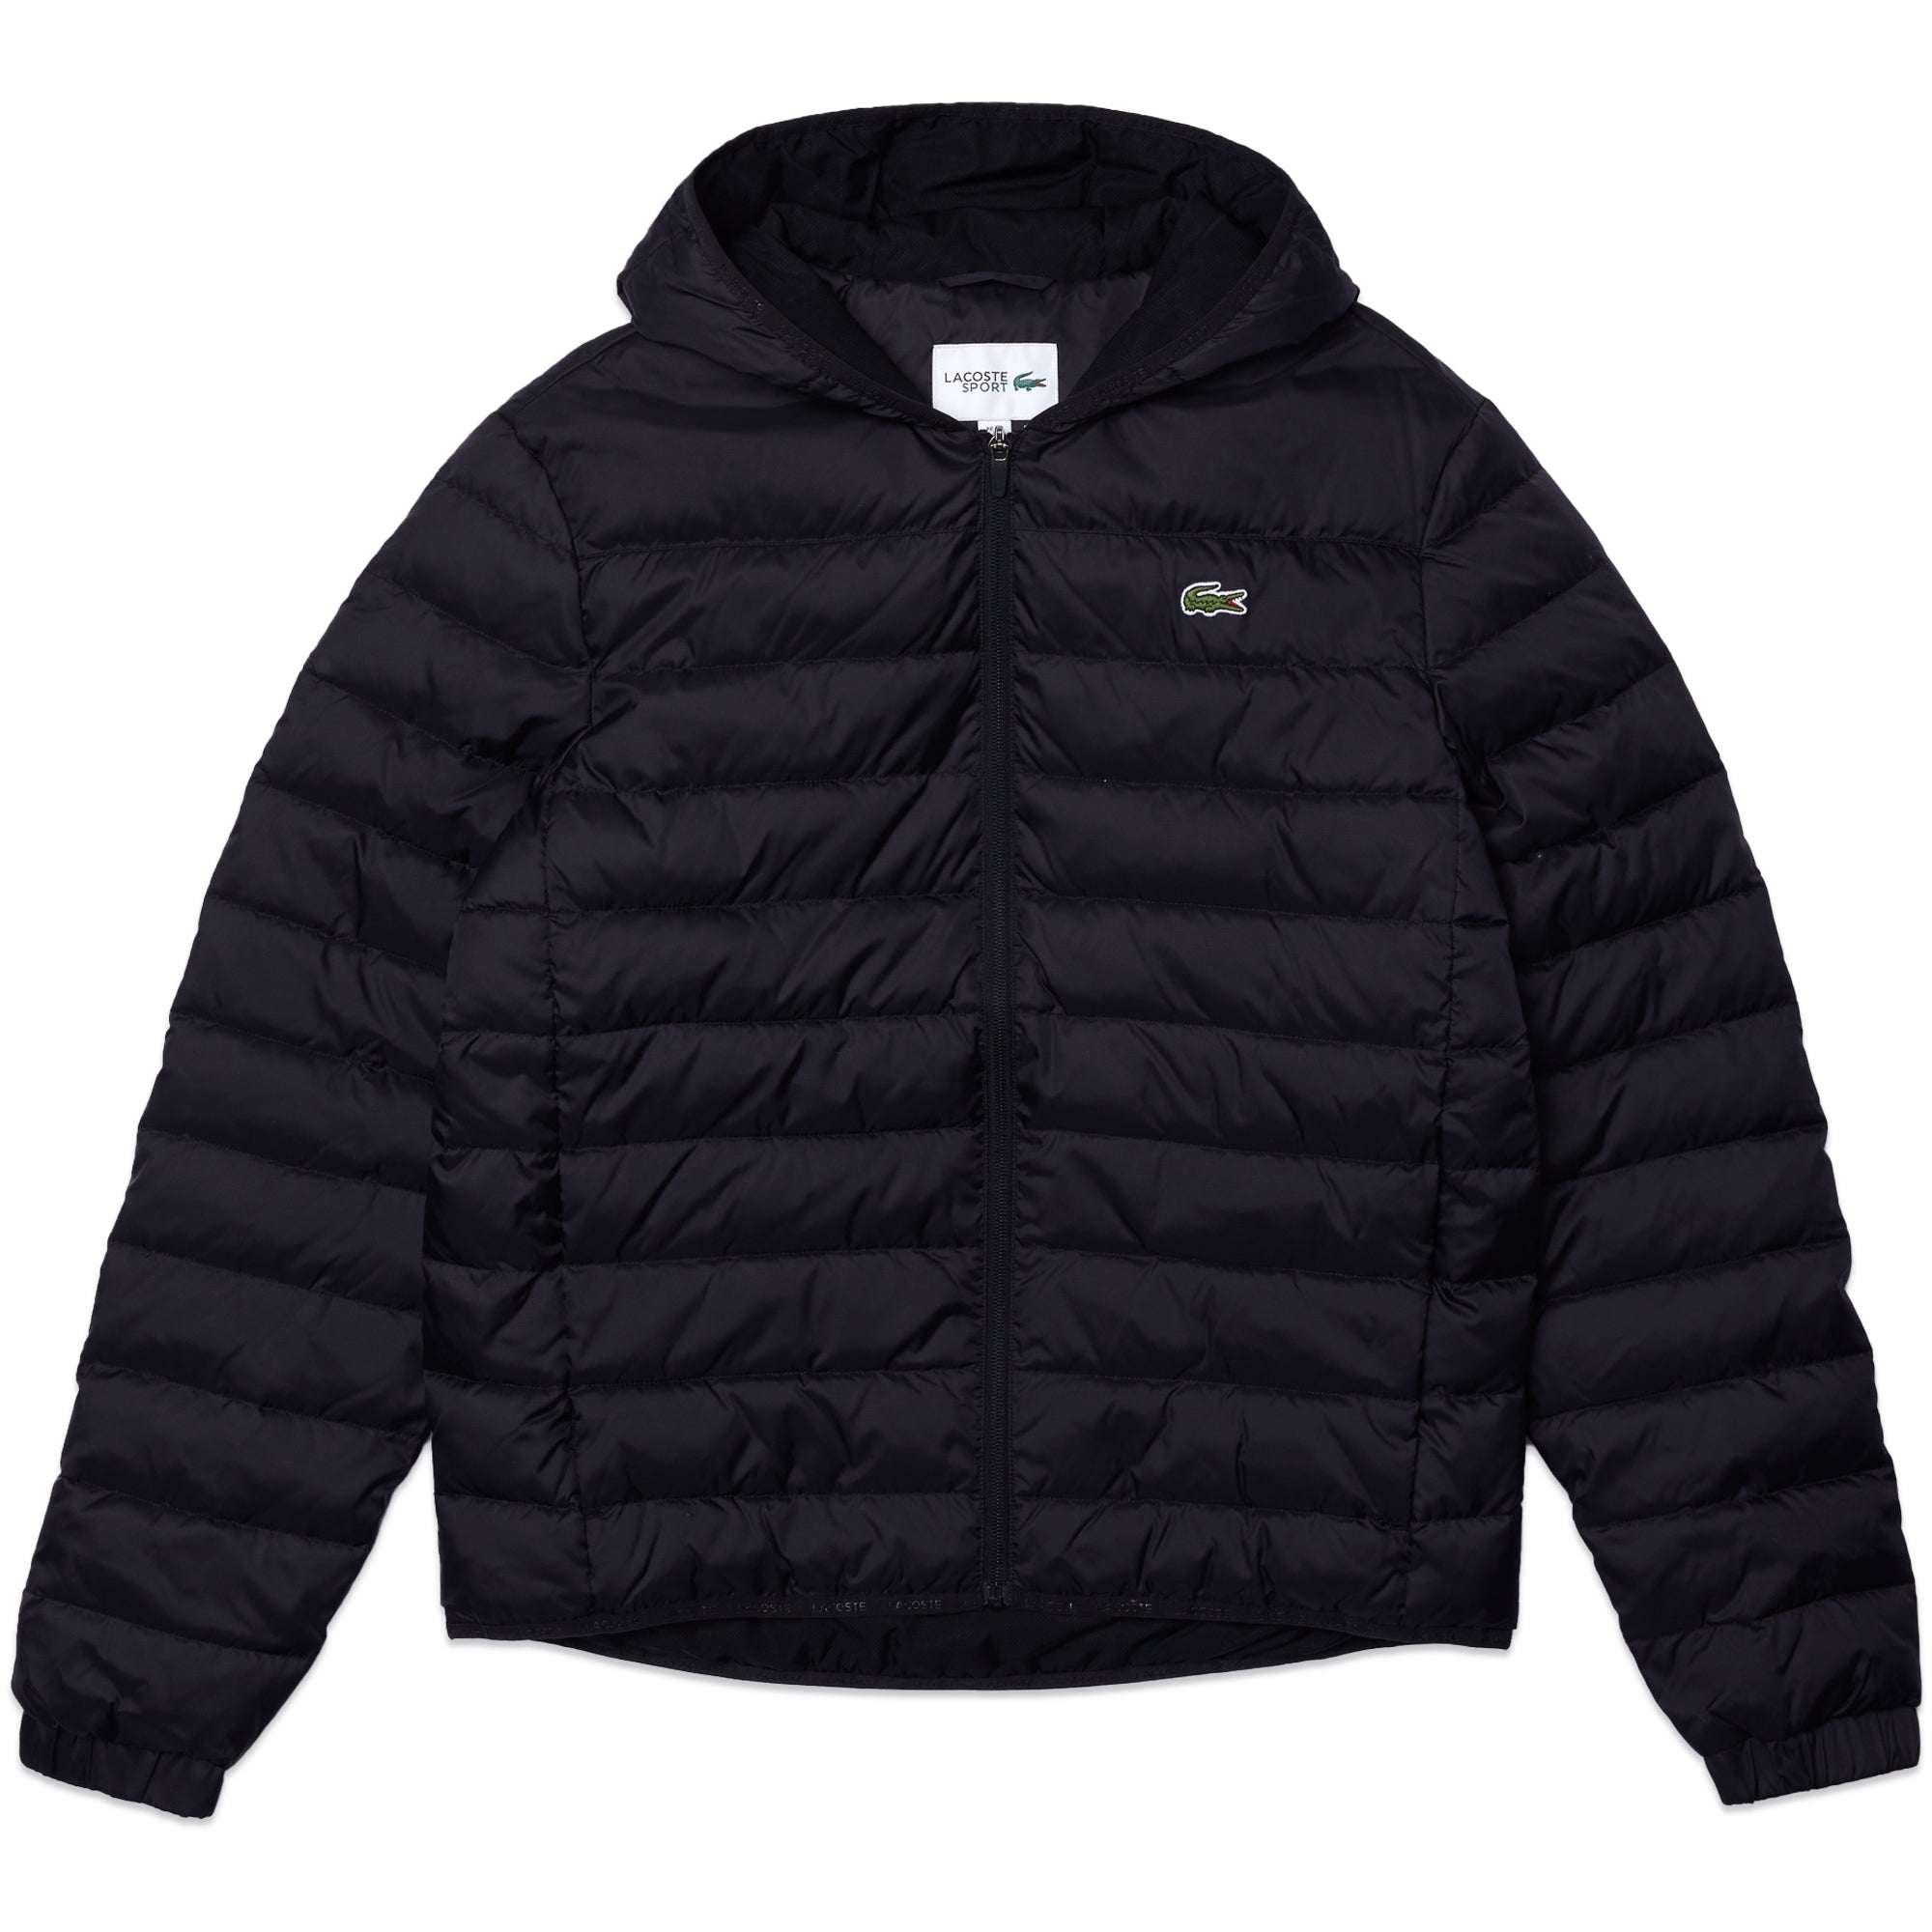 Lacoste BH1531 Padded Jacket - Navy